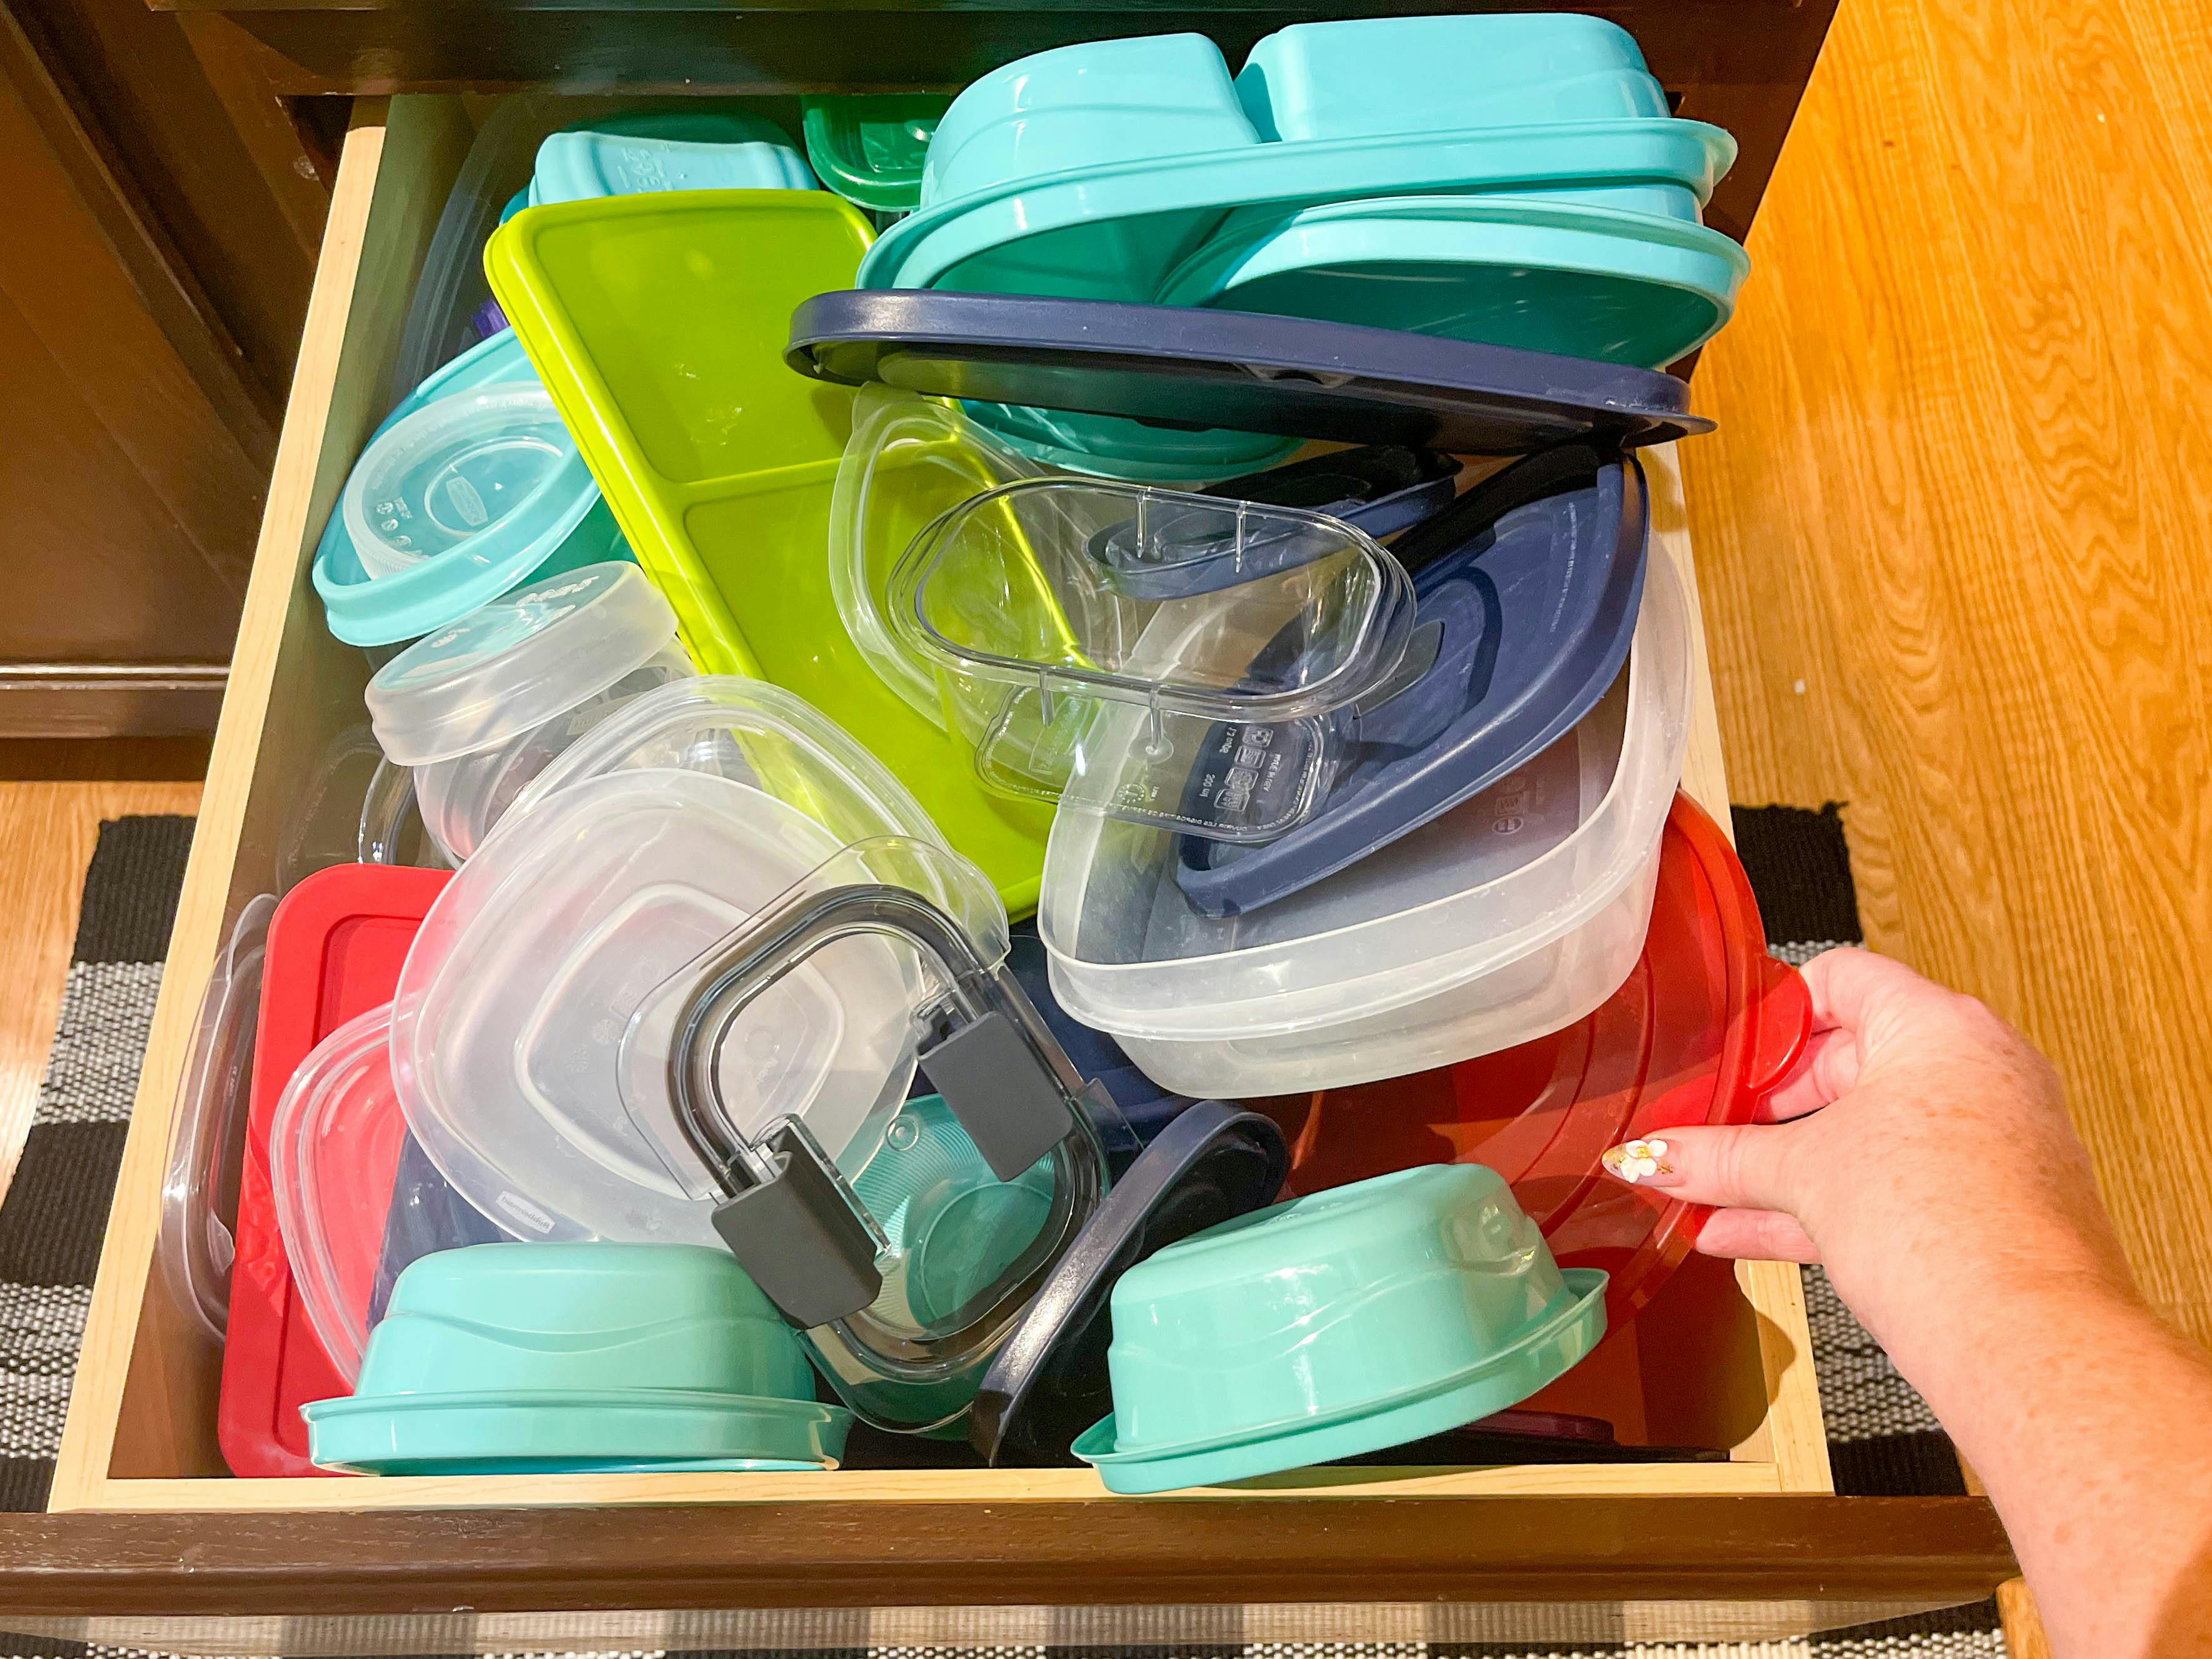 12 Clever Ways to Get Your Tupperware Under Control - The Krazy Coupon Lady